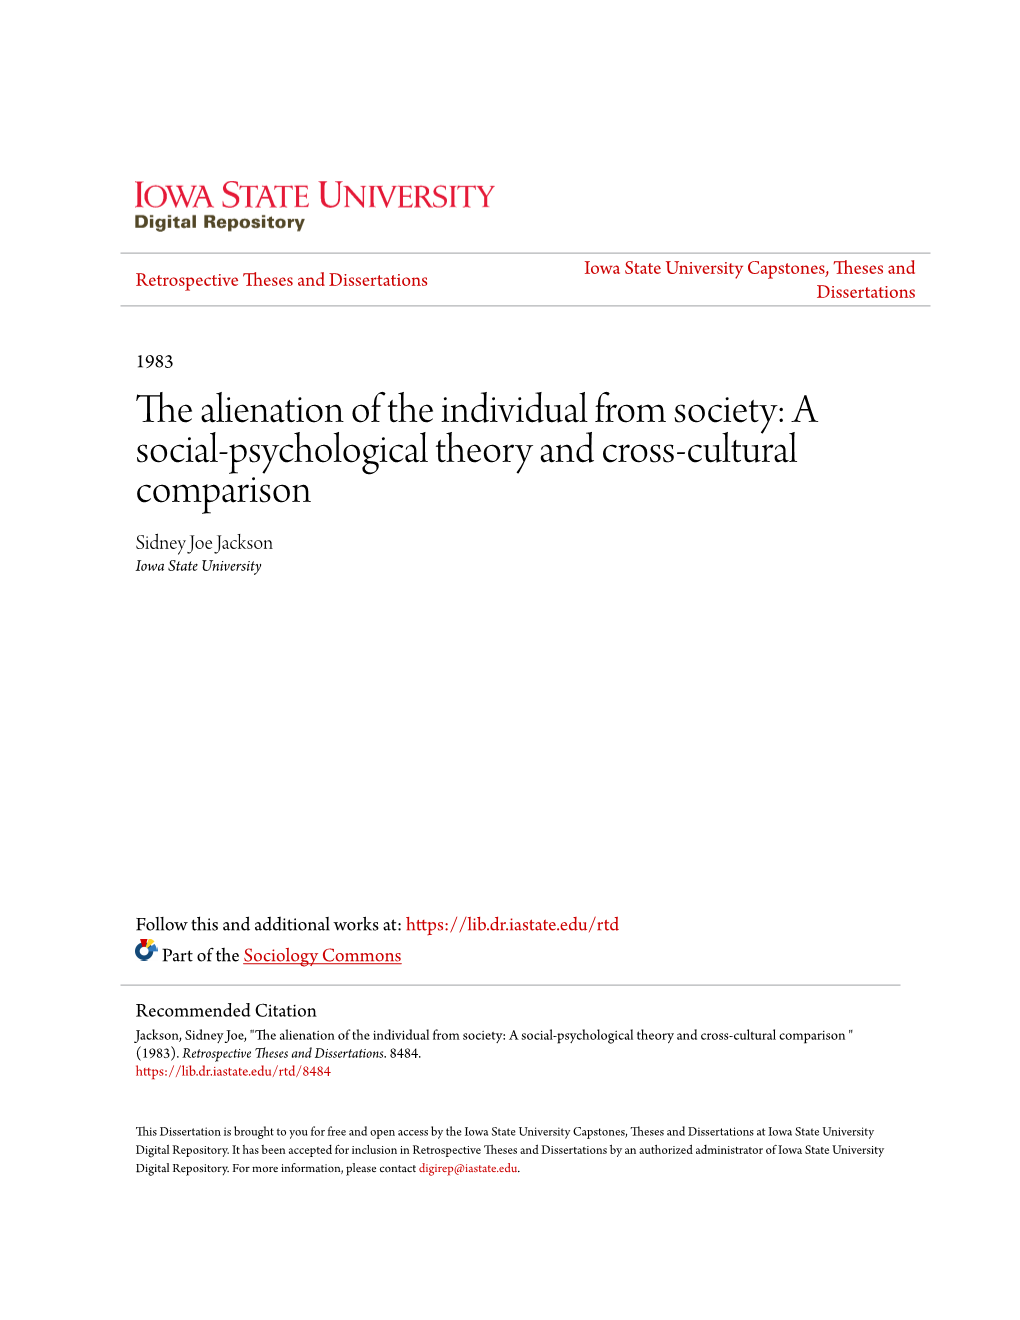 The Alienation of the Individual from Society: a Social-Psychological Theory and Cross-Cultural Comparison Sidney Joe Jackson Iowa State University